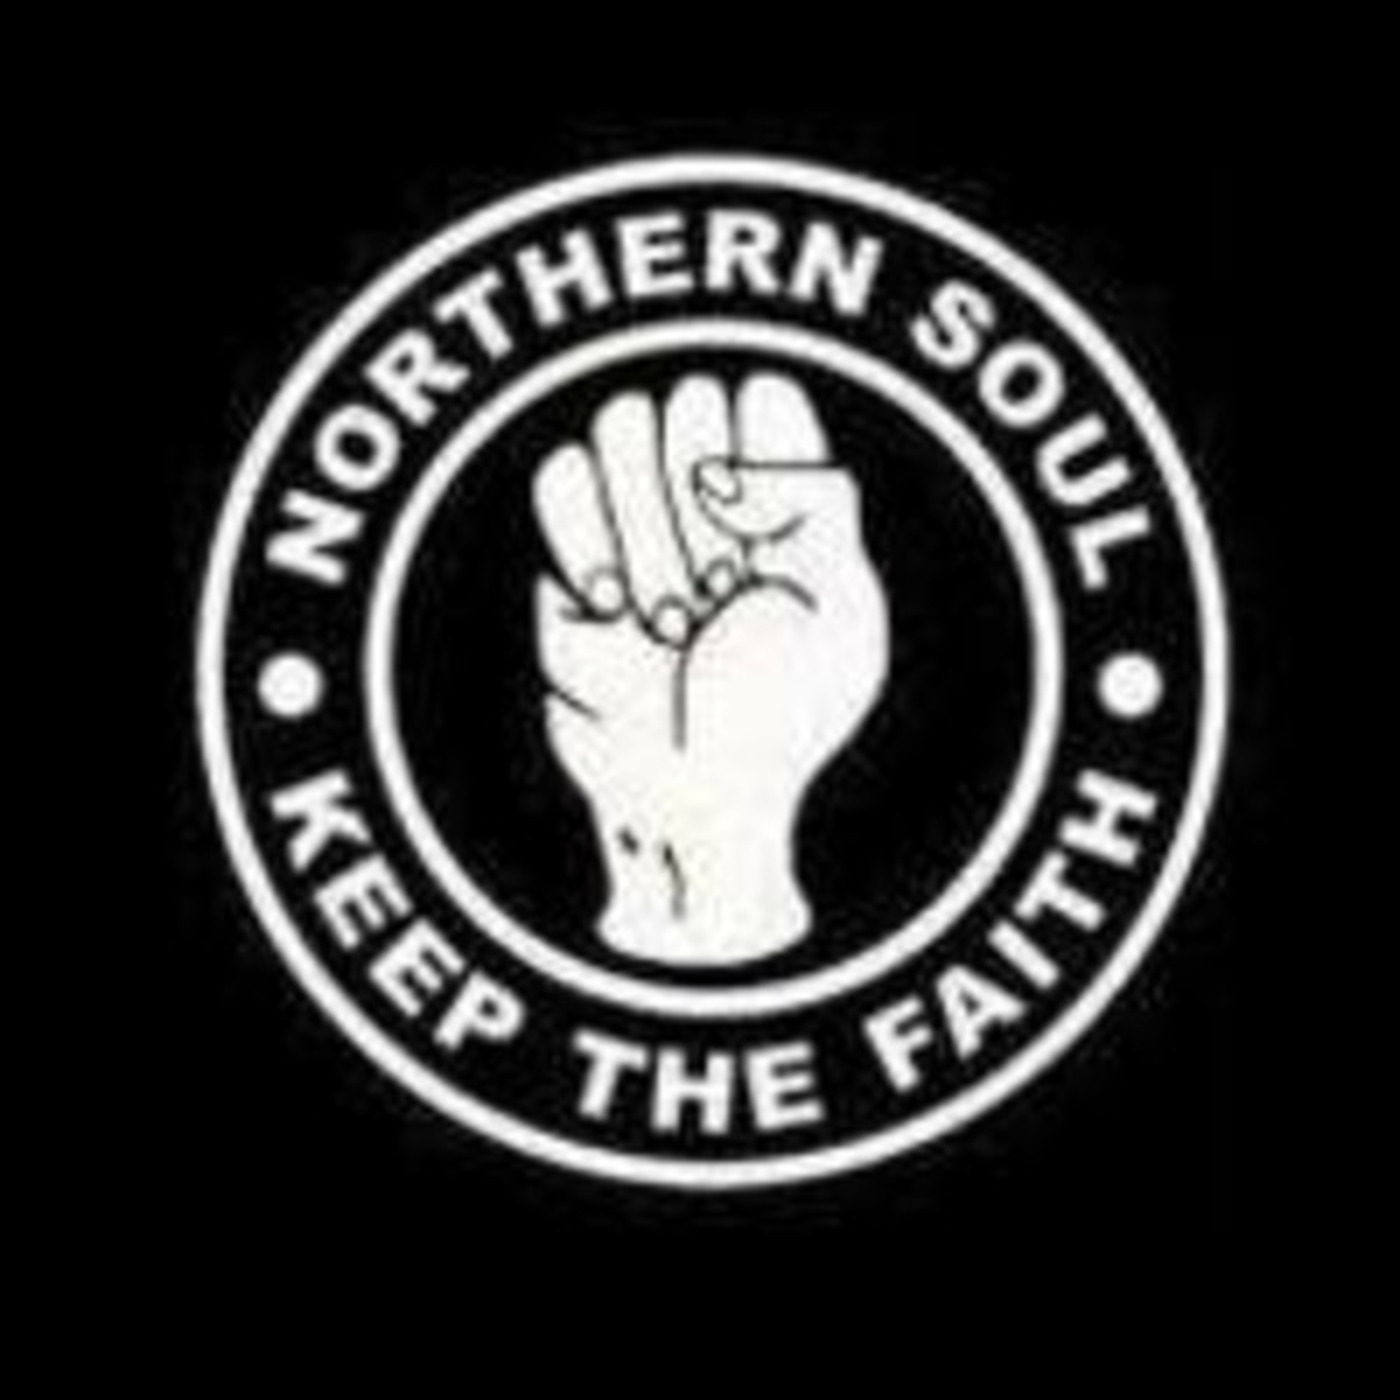 Northern soul hour spring 2023